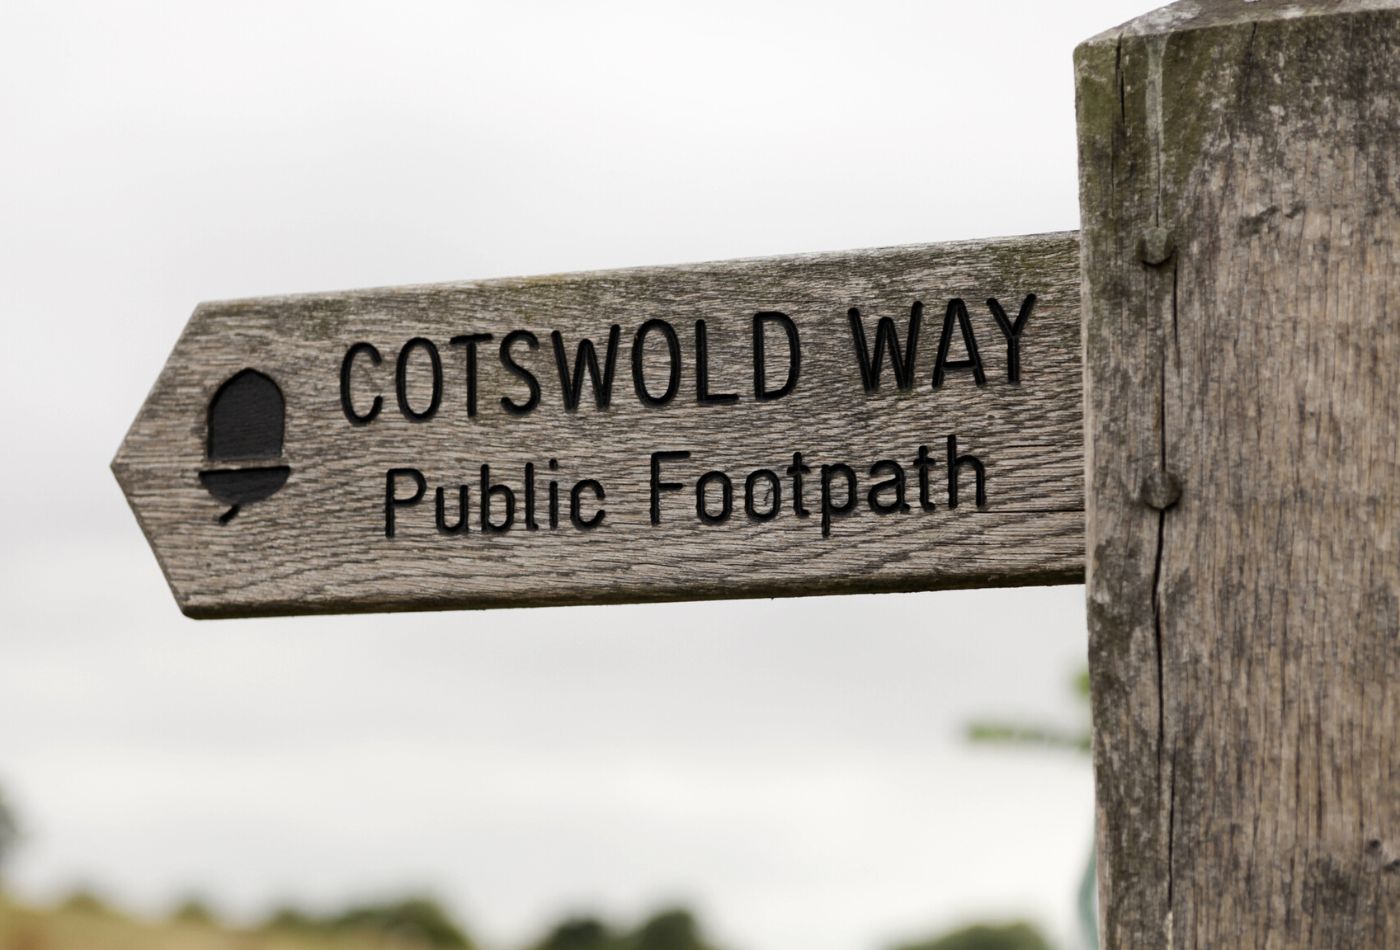 Visit the Cotswolds Way